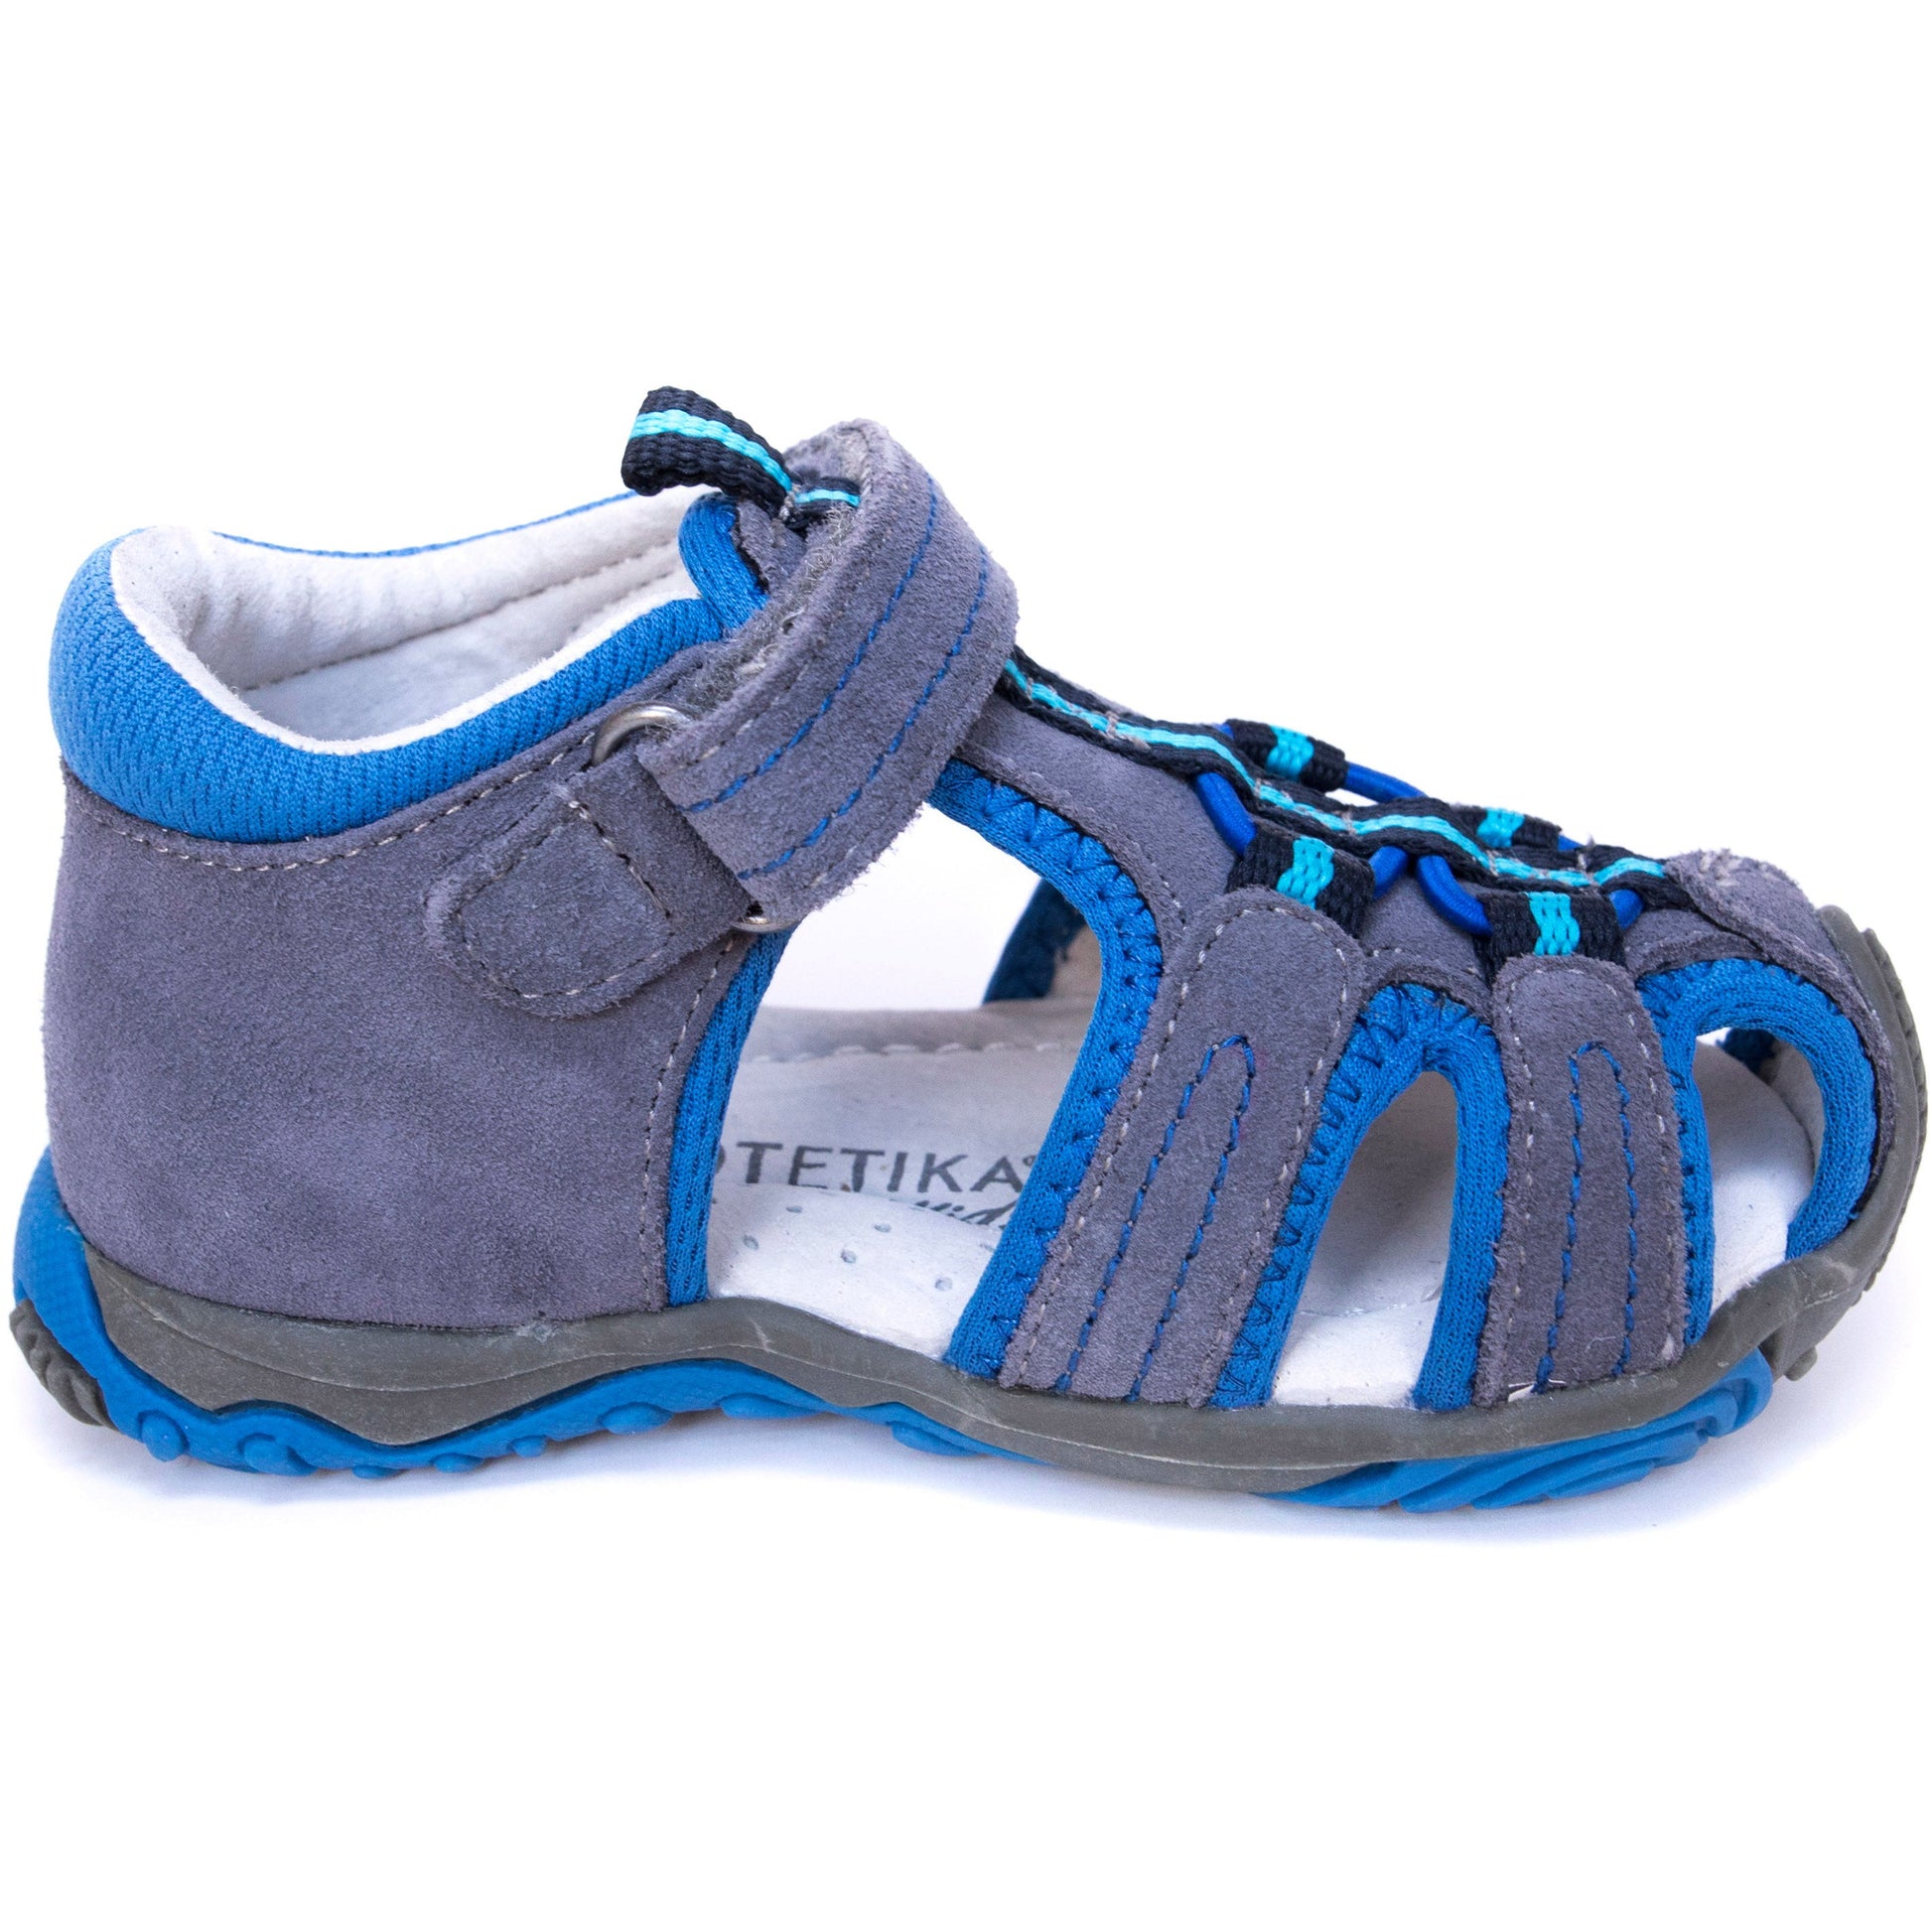 SID grey toddler boy arch support sandals - feelgoodshoes.ae